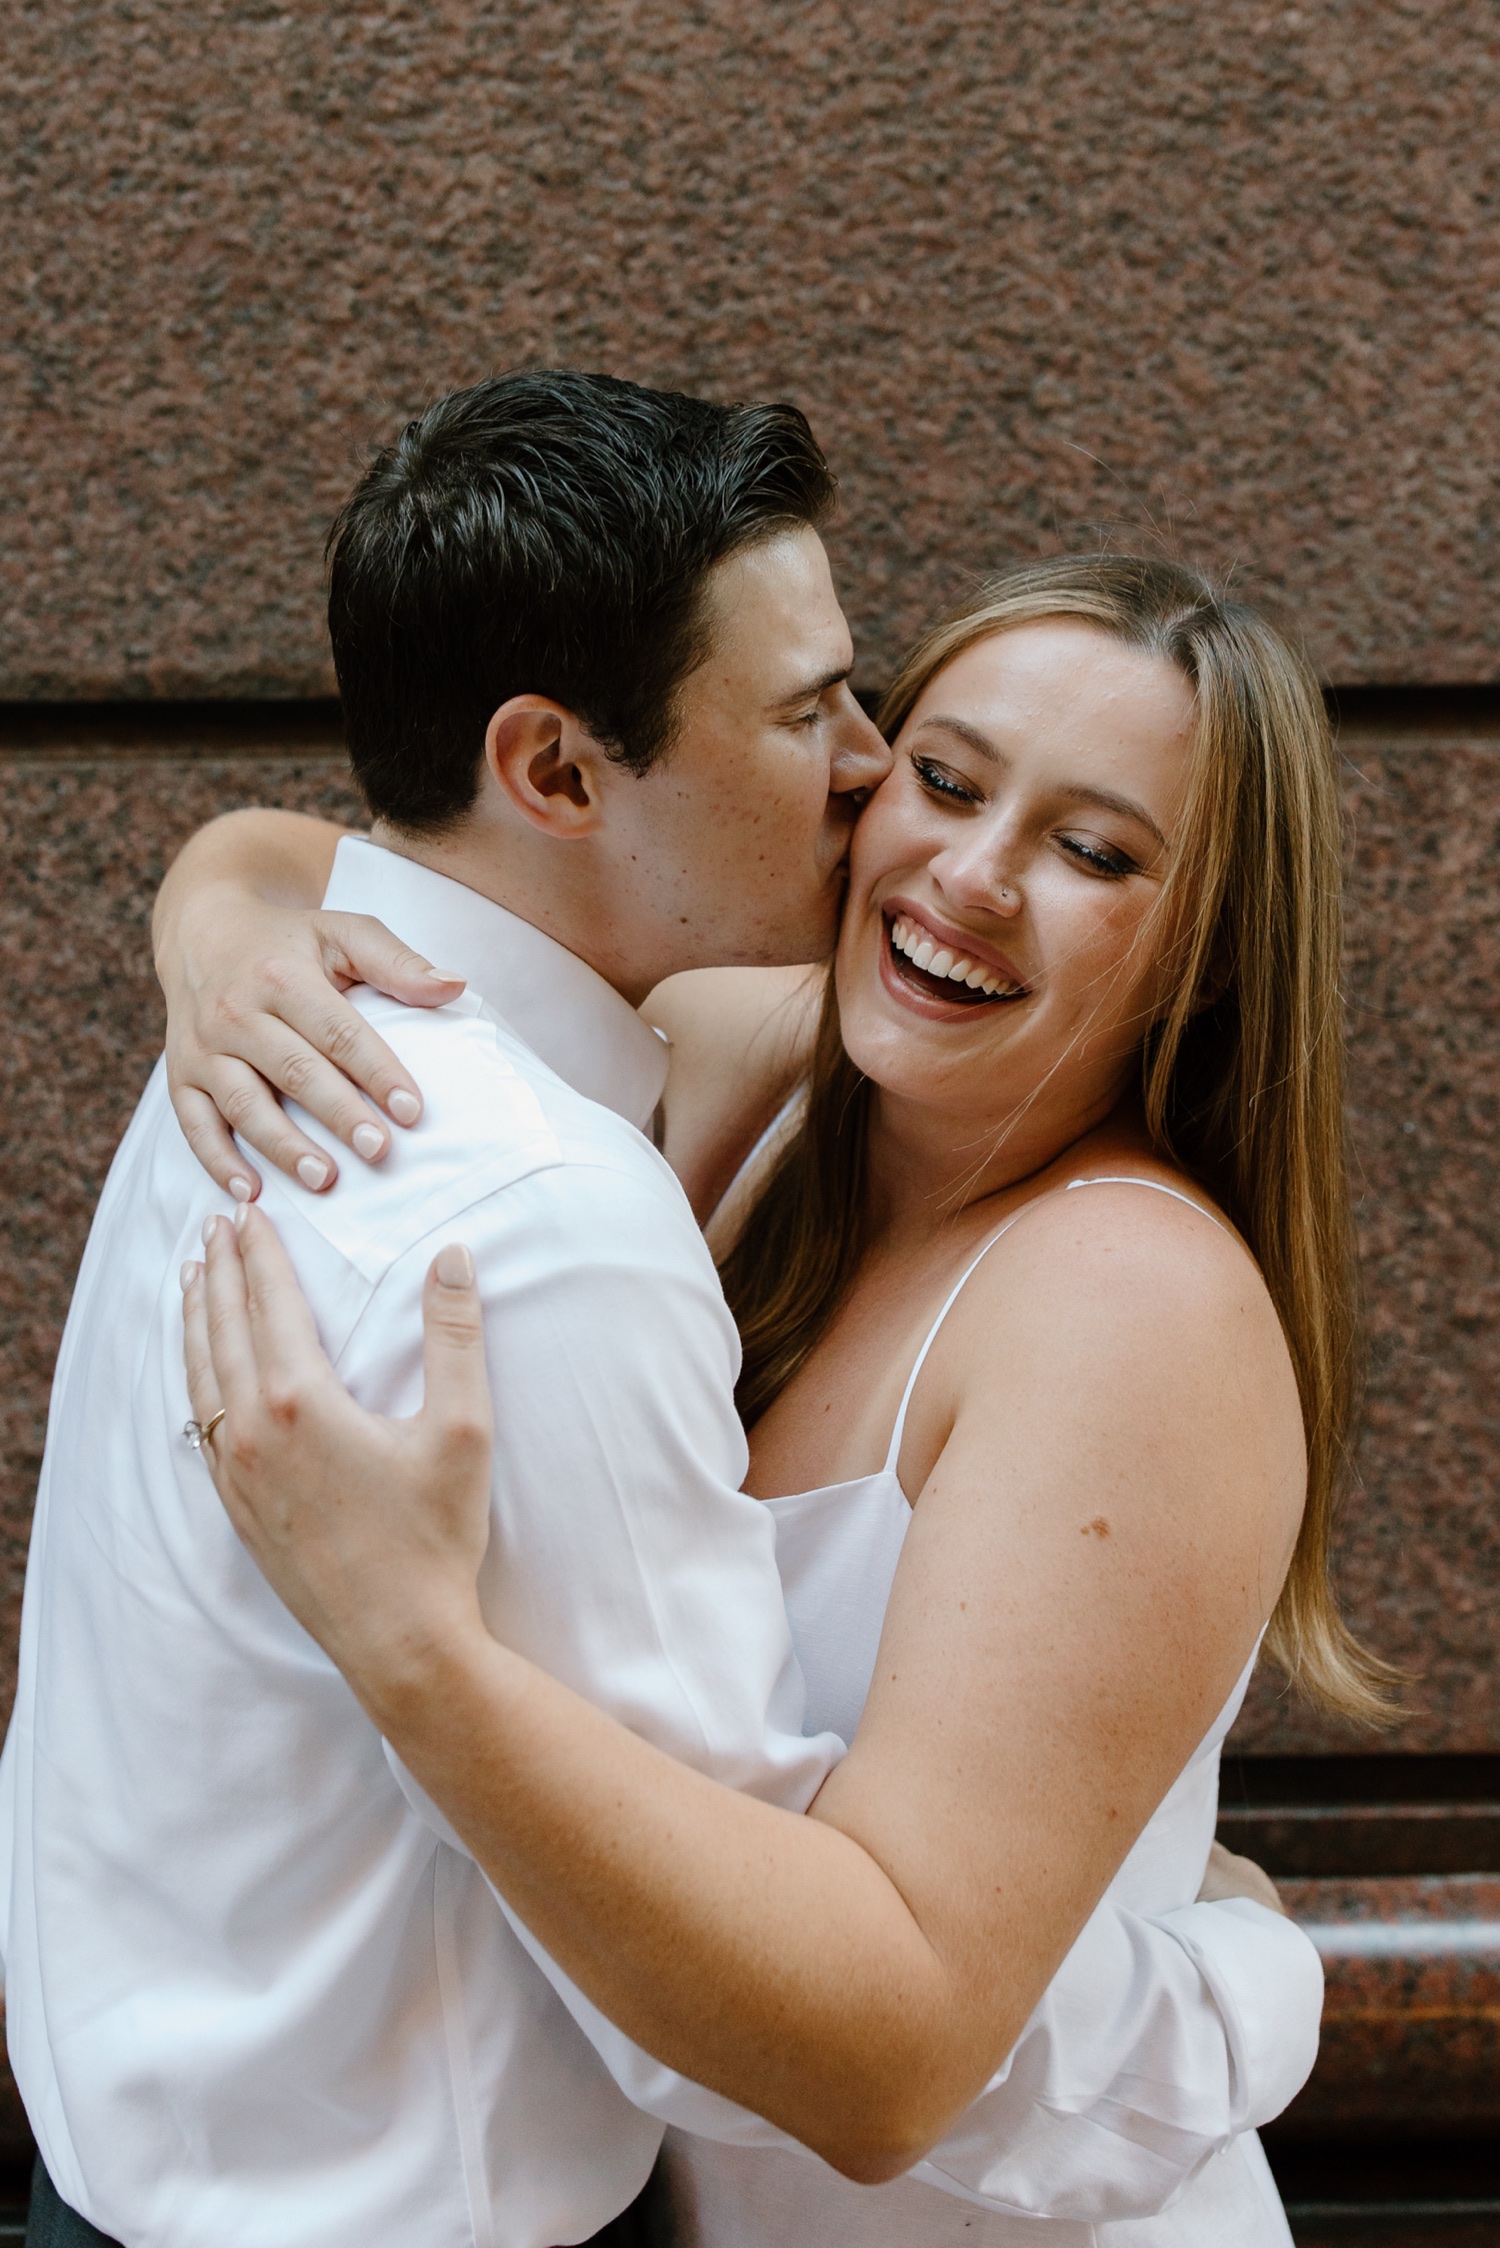 City Engagement Photos in Downtown Chicago